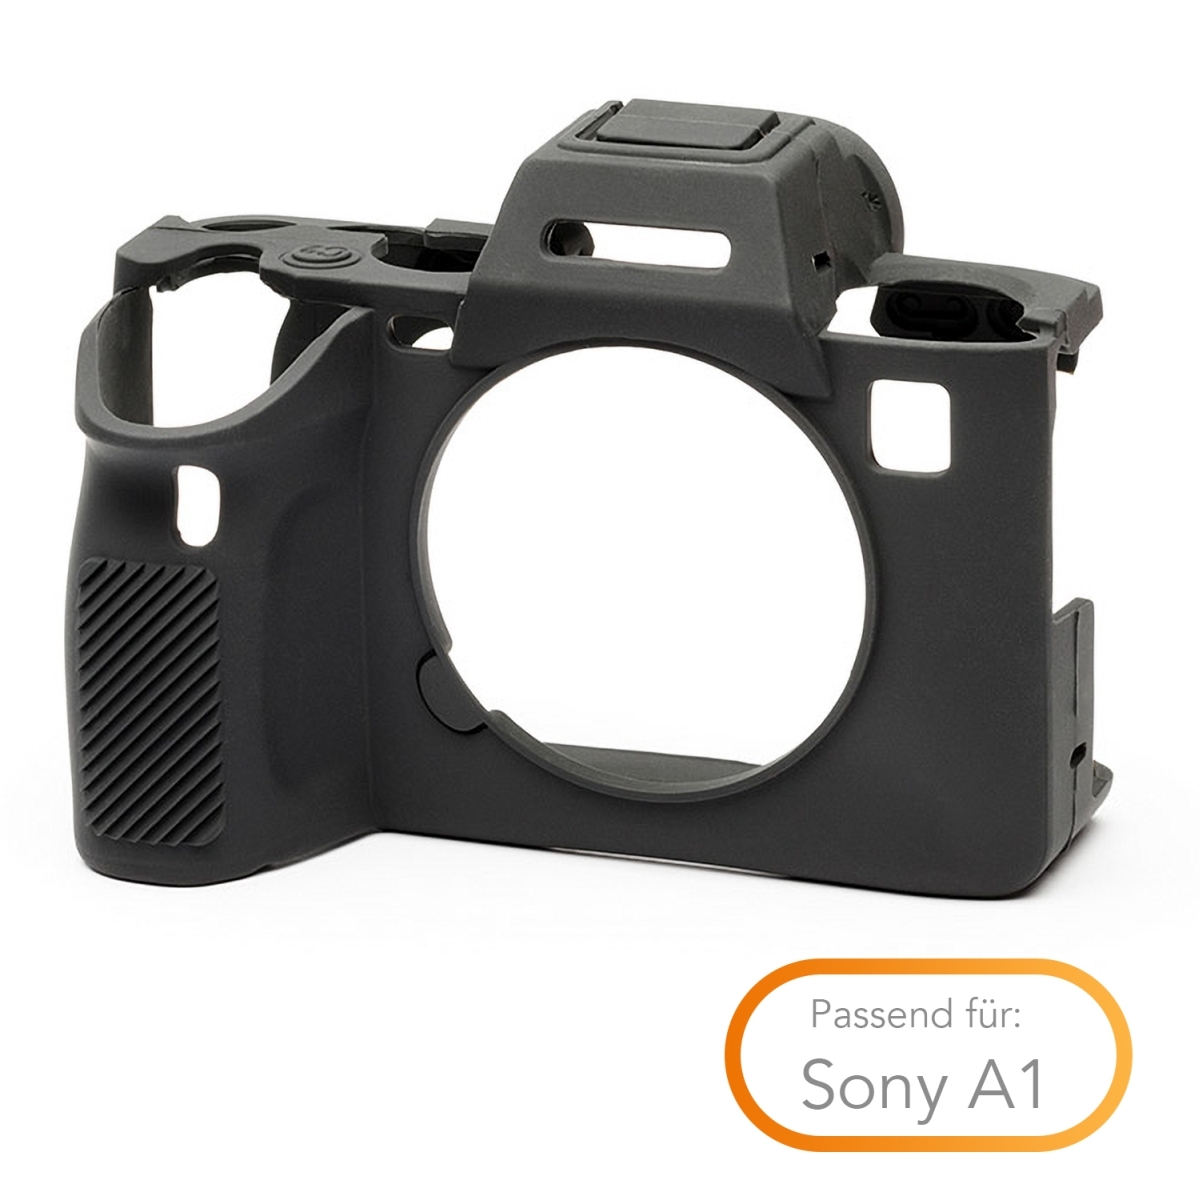 Walimex pro easyCover for Sony A1